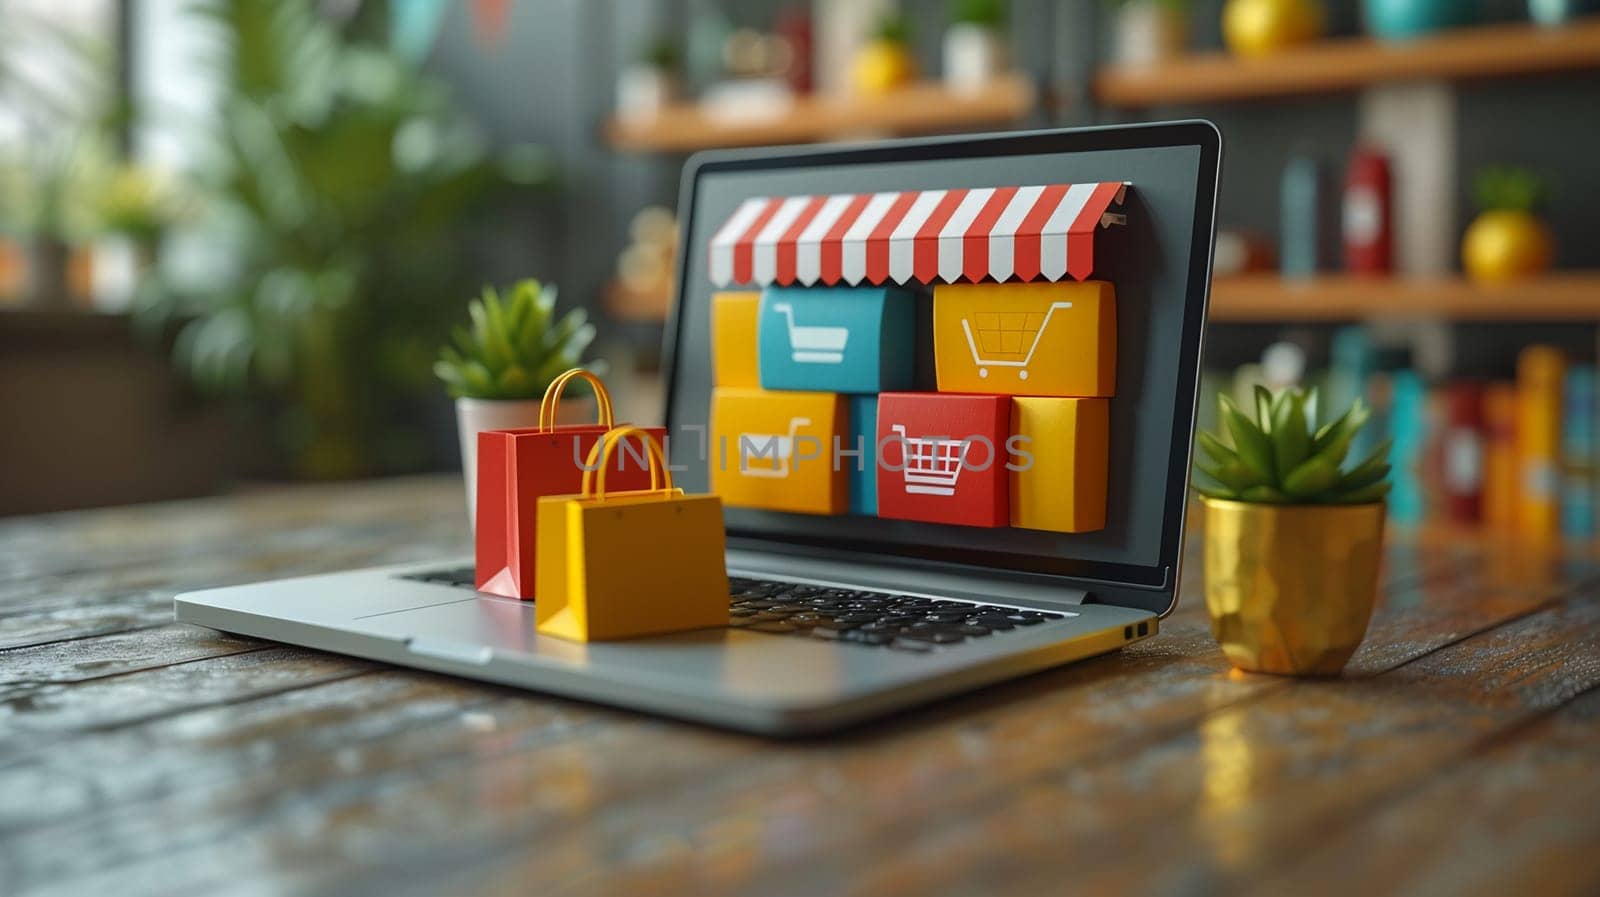 Conceptual image of online shopping displayed on laptop with colorful shopping bags and digital payment icons, indicating convenience and modern retail trends.